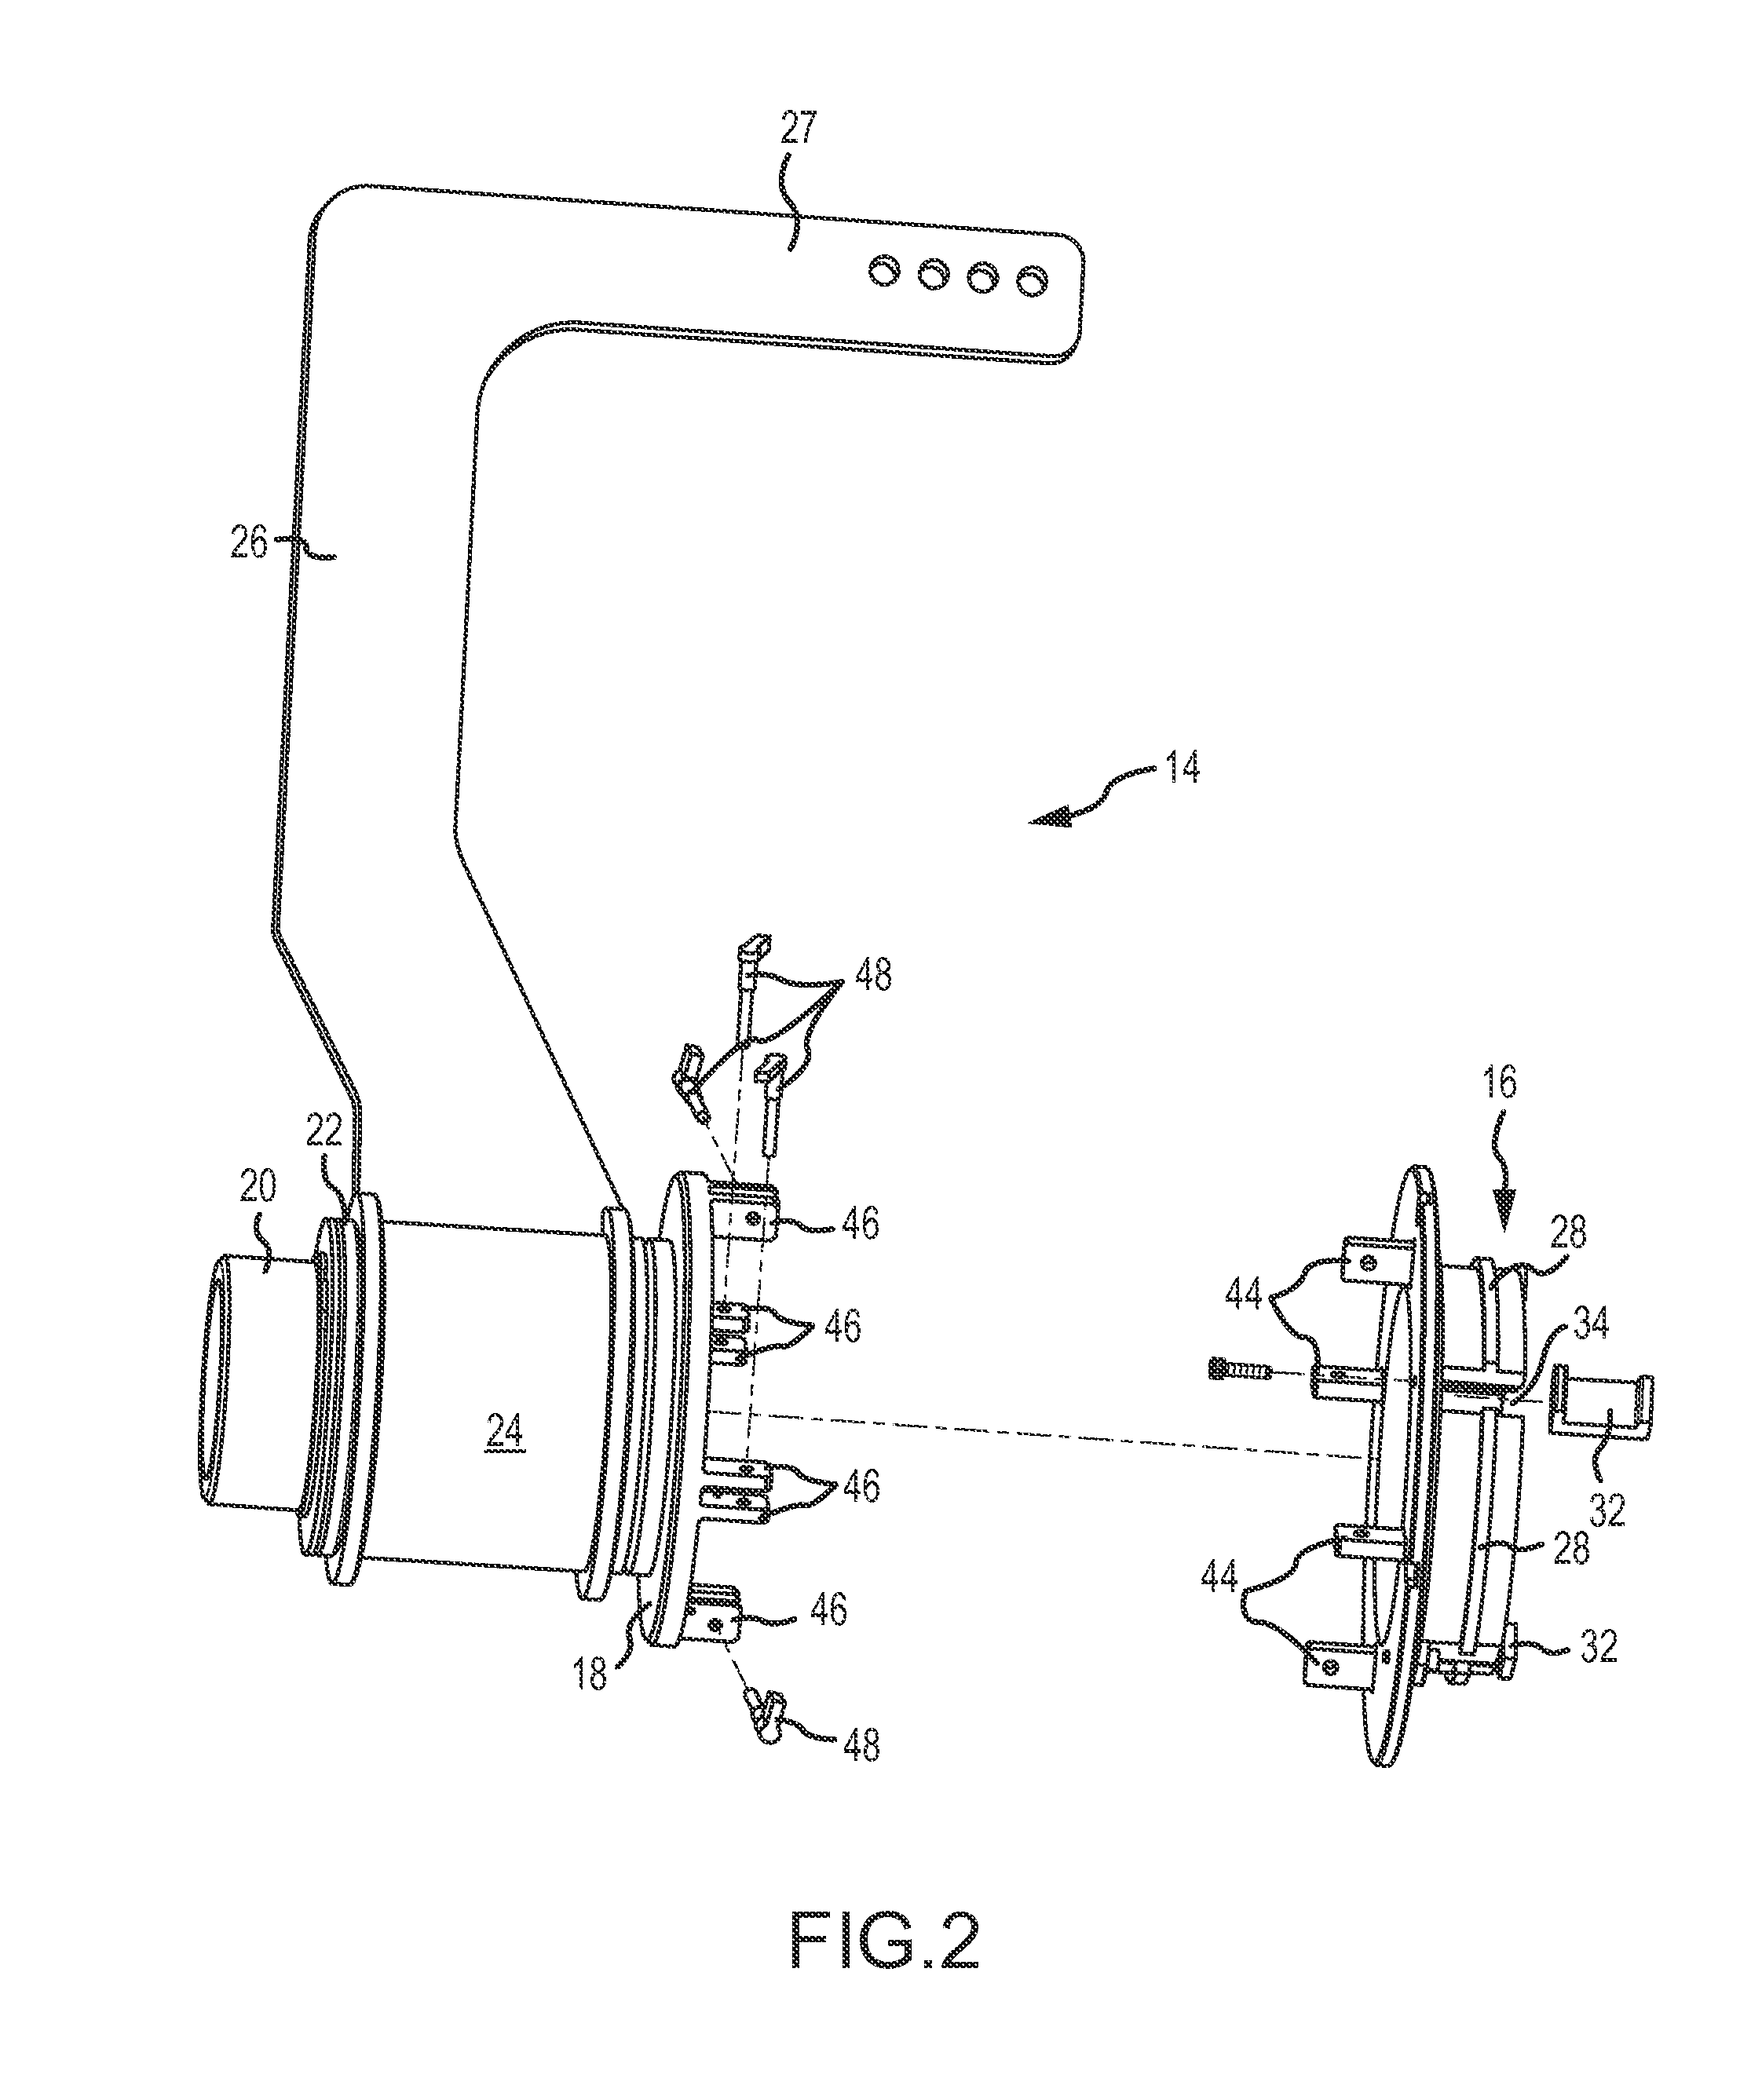 Method and Tooling for Partial Disassembly of a Bypass Turbofan Engine